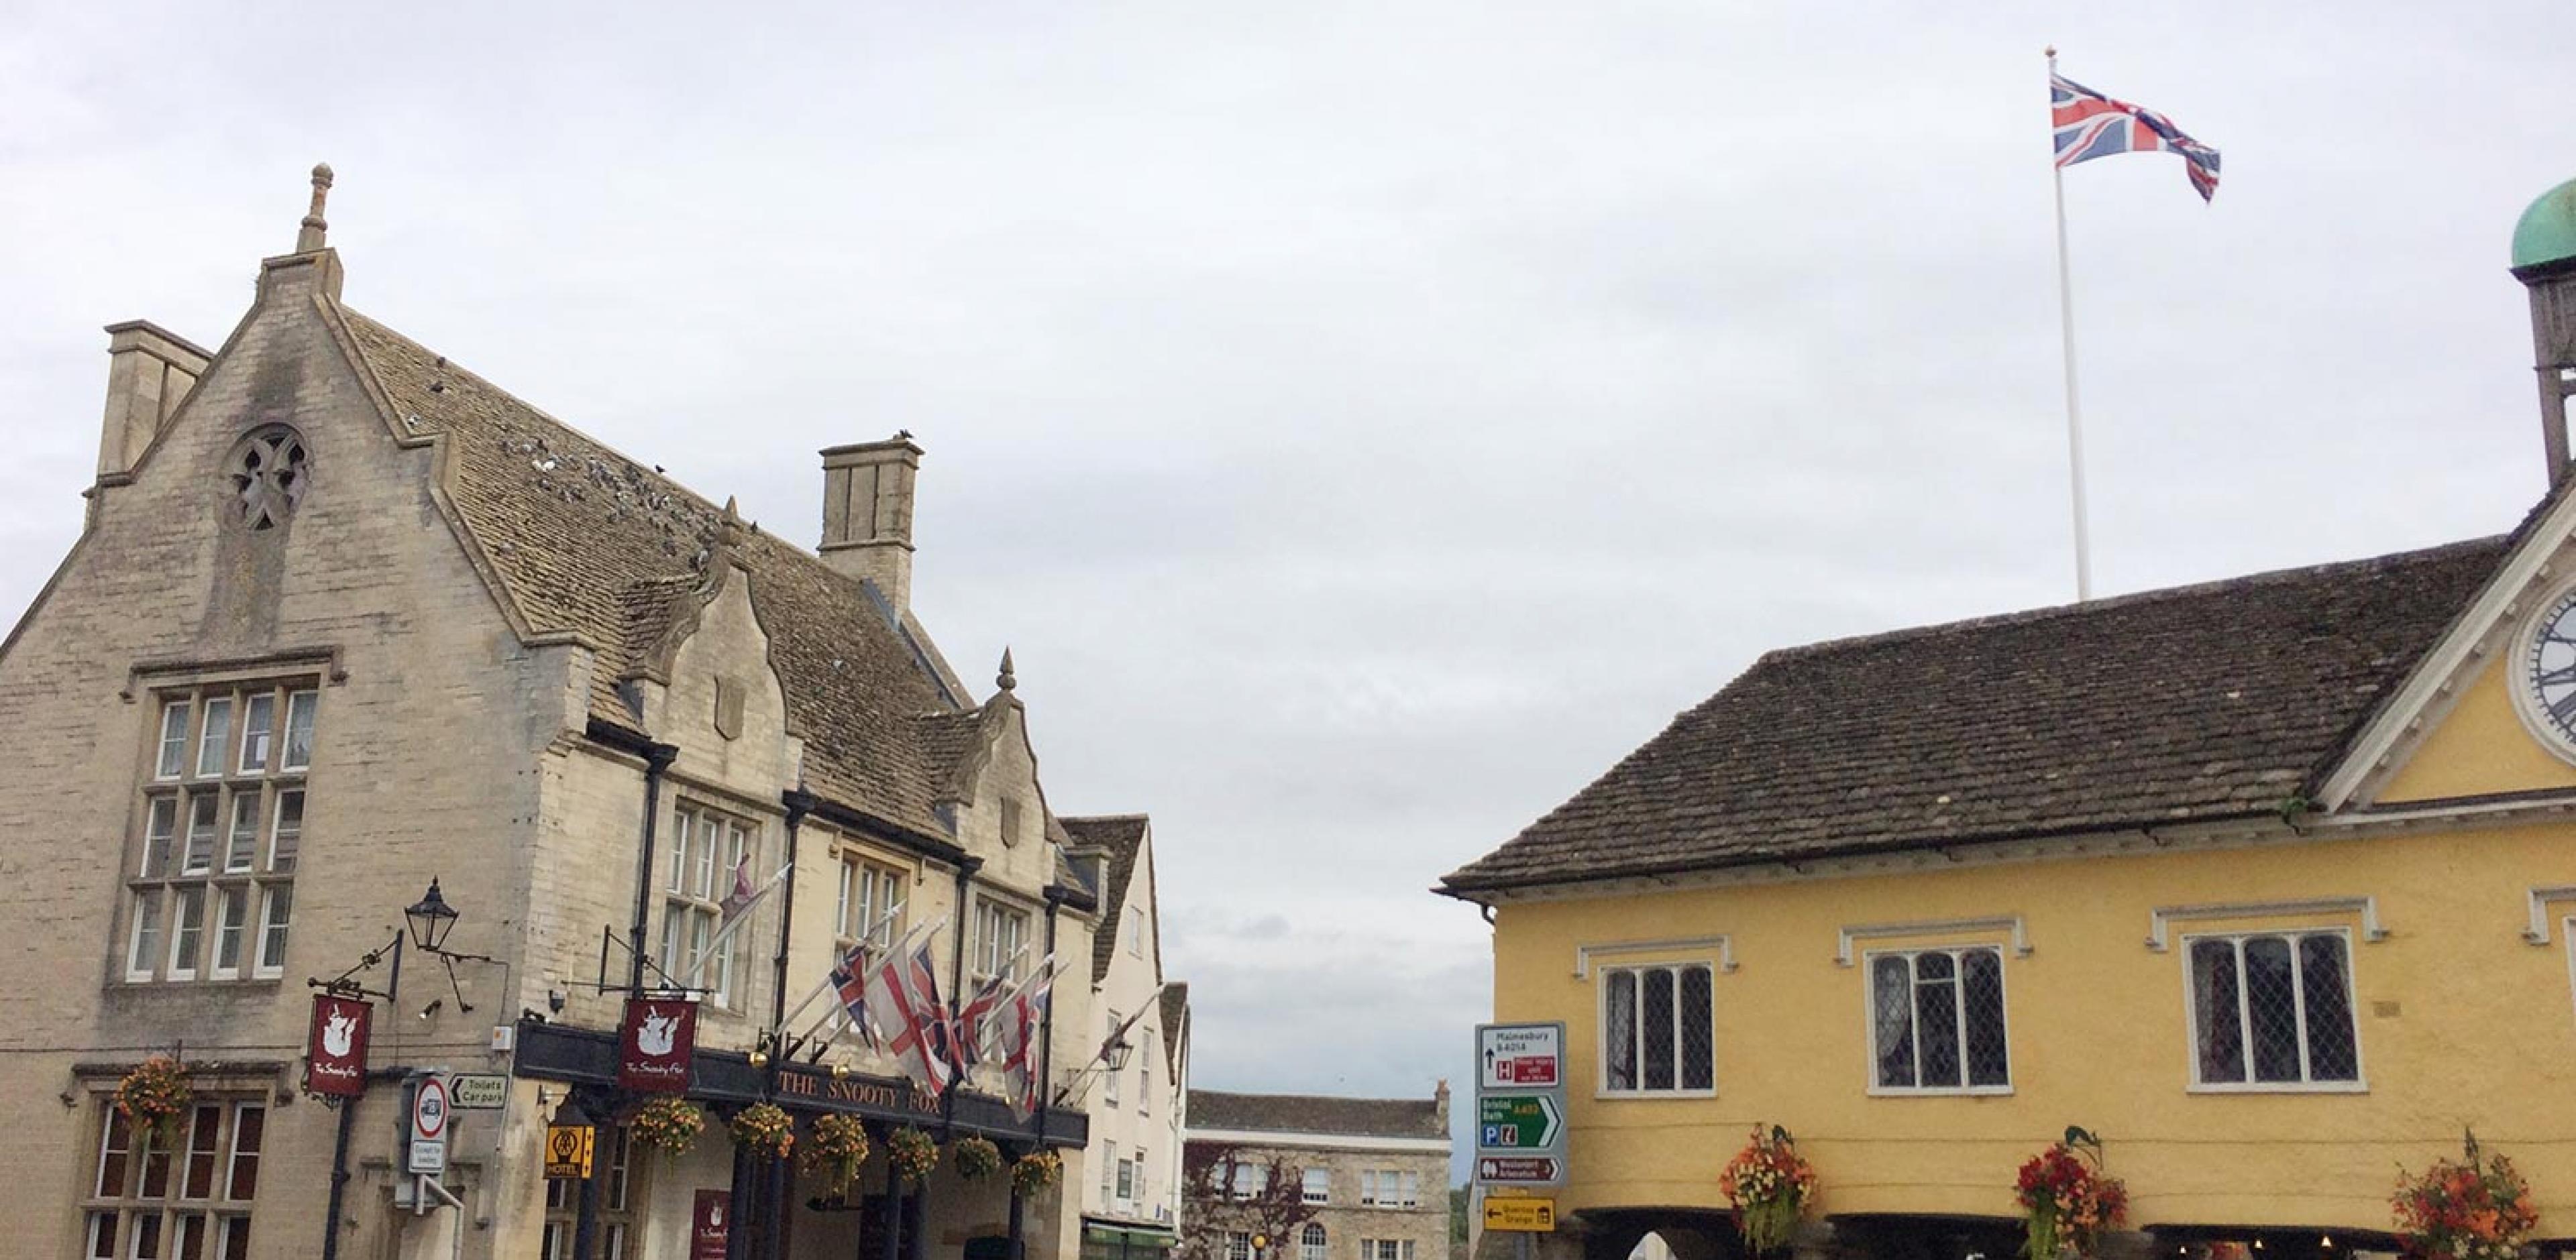 two historic buildings in an english small countrytown's center, one has the british flag flying on a flagpole from the roof 